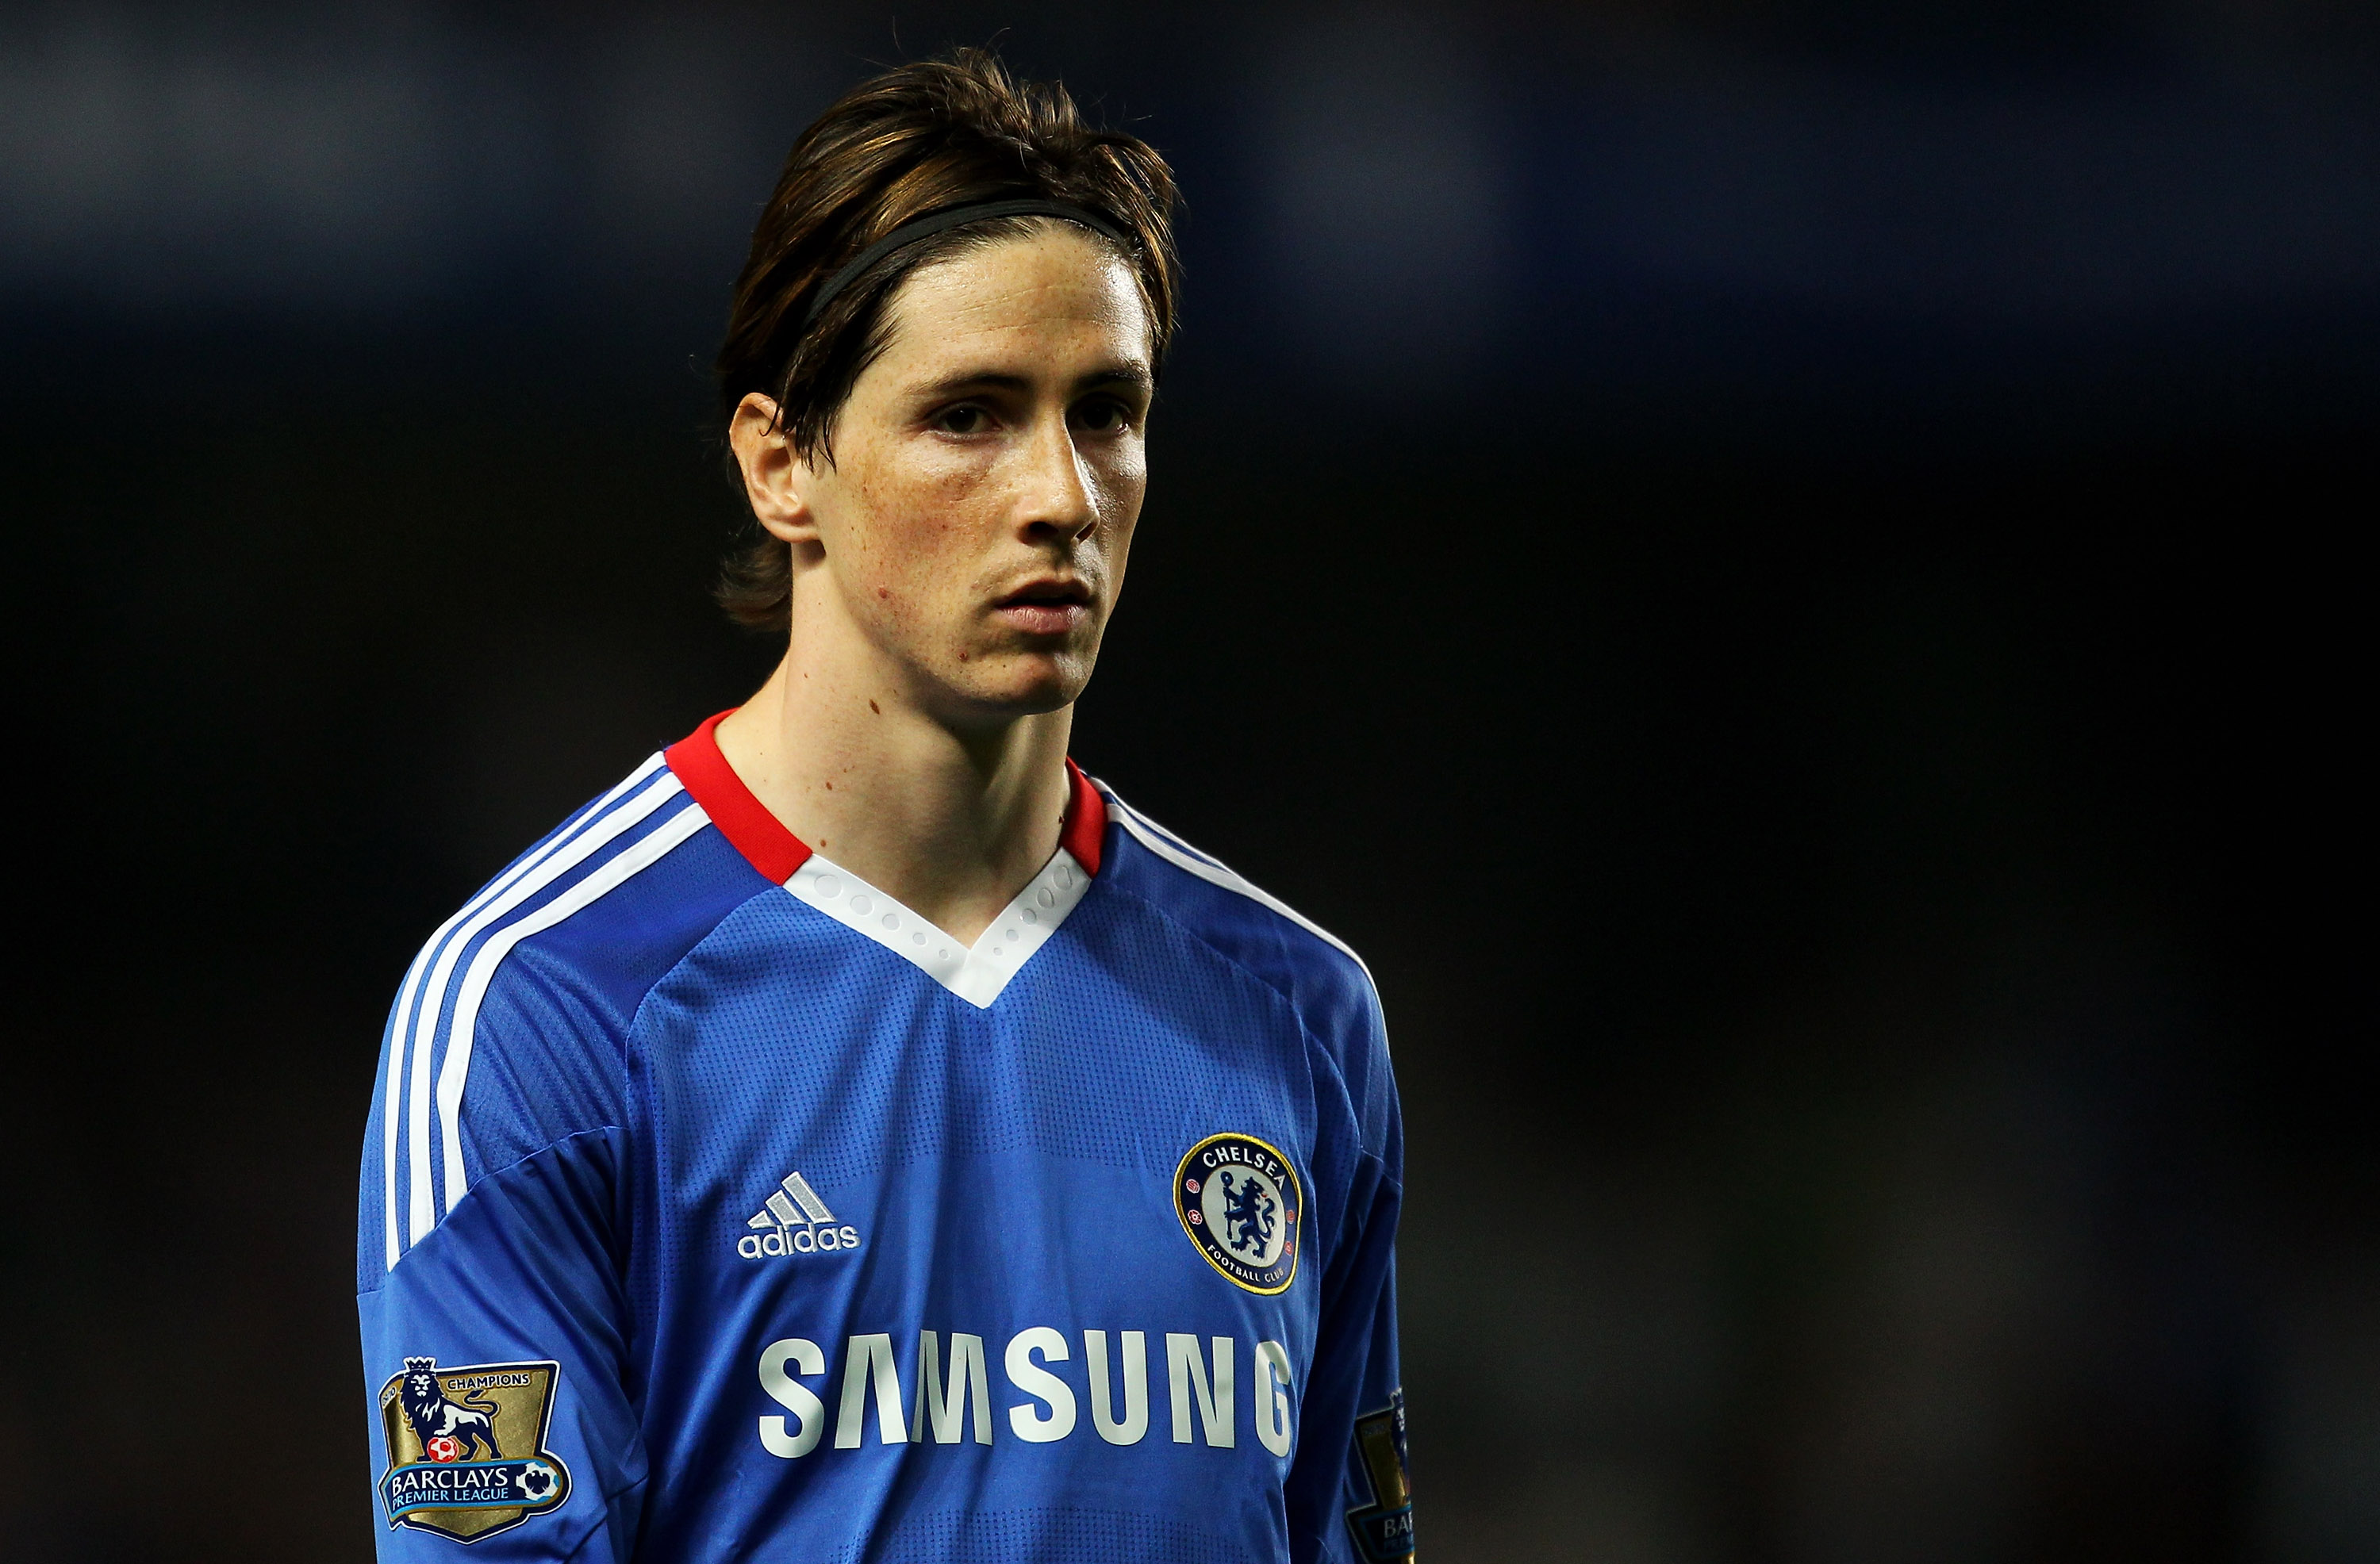 LONDON, ENGLAND - APRIL 20:  Fernando Torres of Chelsea looks on during the Barclays Premier League match between Chelsea and Birmingham City at Stamford Bridge on April 20, 2011 in London, England.  (Photo by Julian Finney/Getty Images)